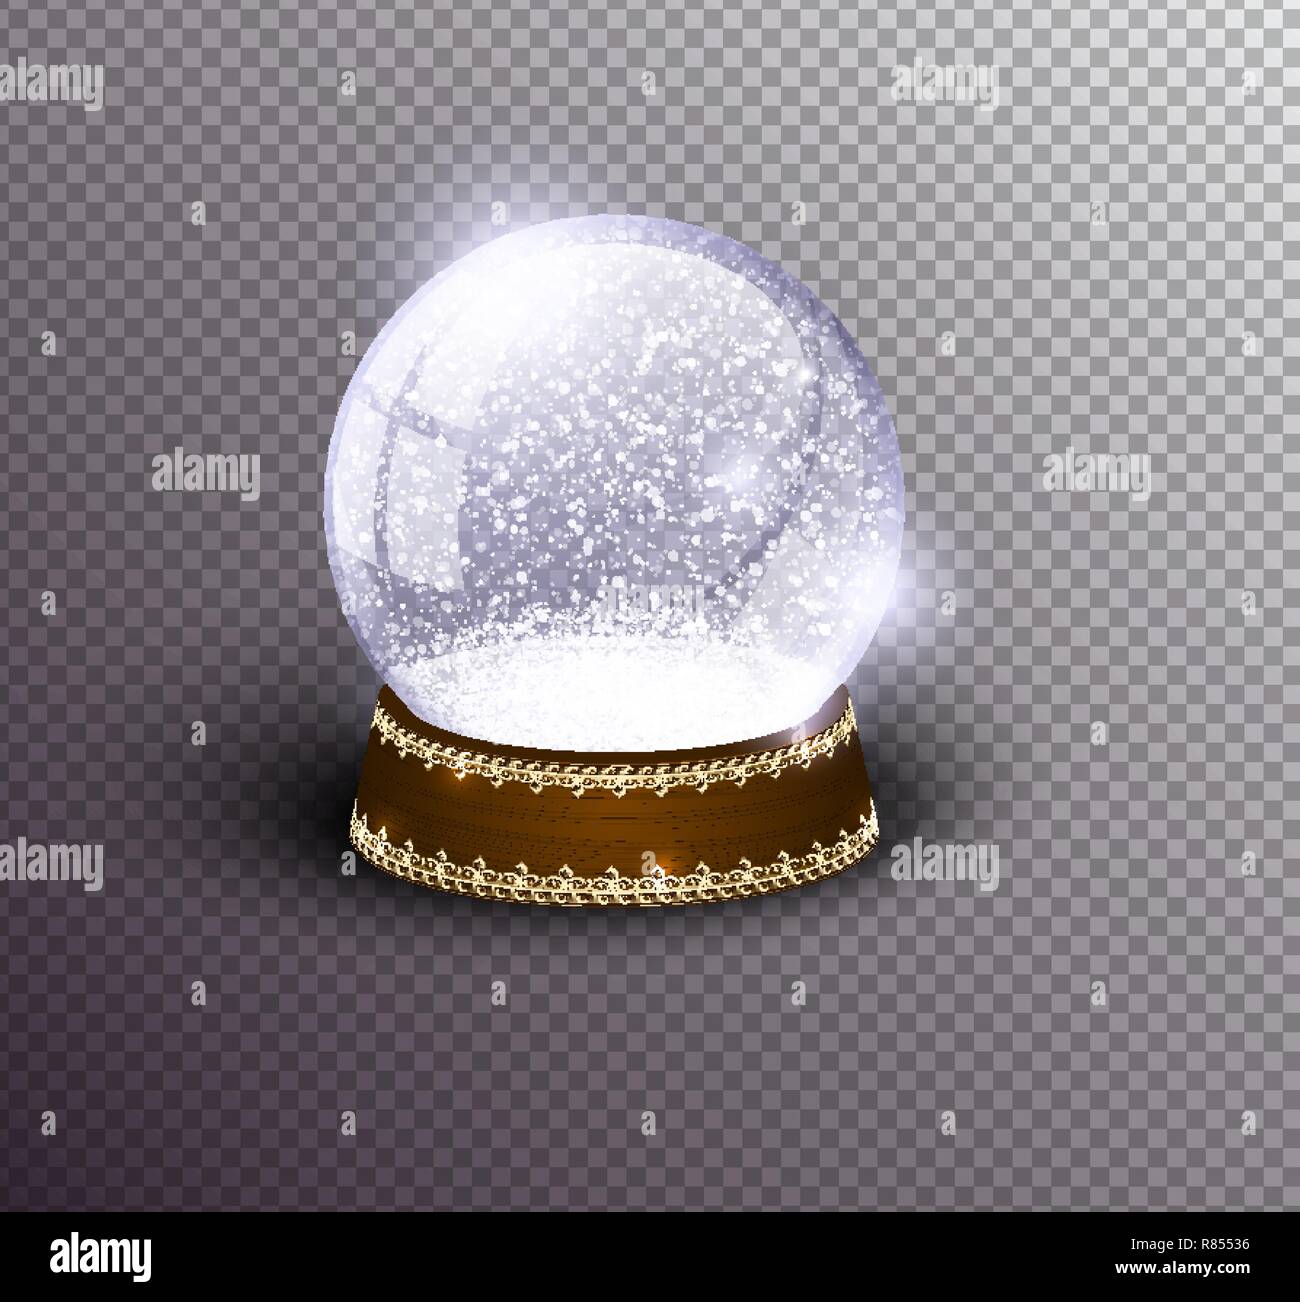 Vector snow globe empty template isolated on transparent background. Christmas magic ball. Glass ball dome, wooden stand with silver crown decor Stock Vector